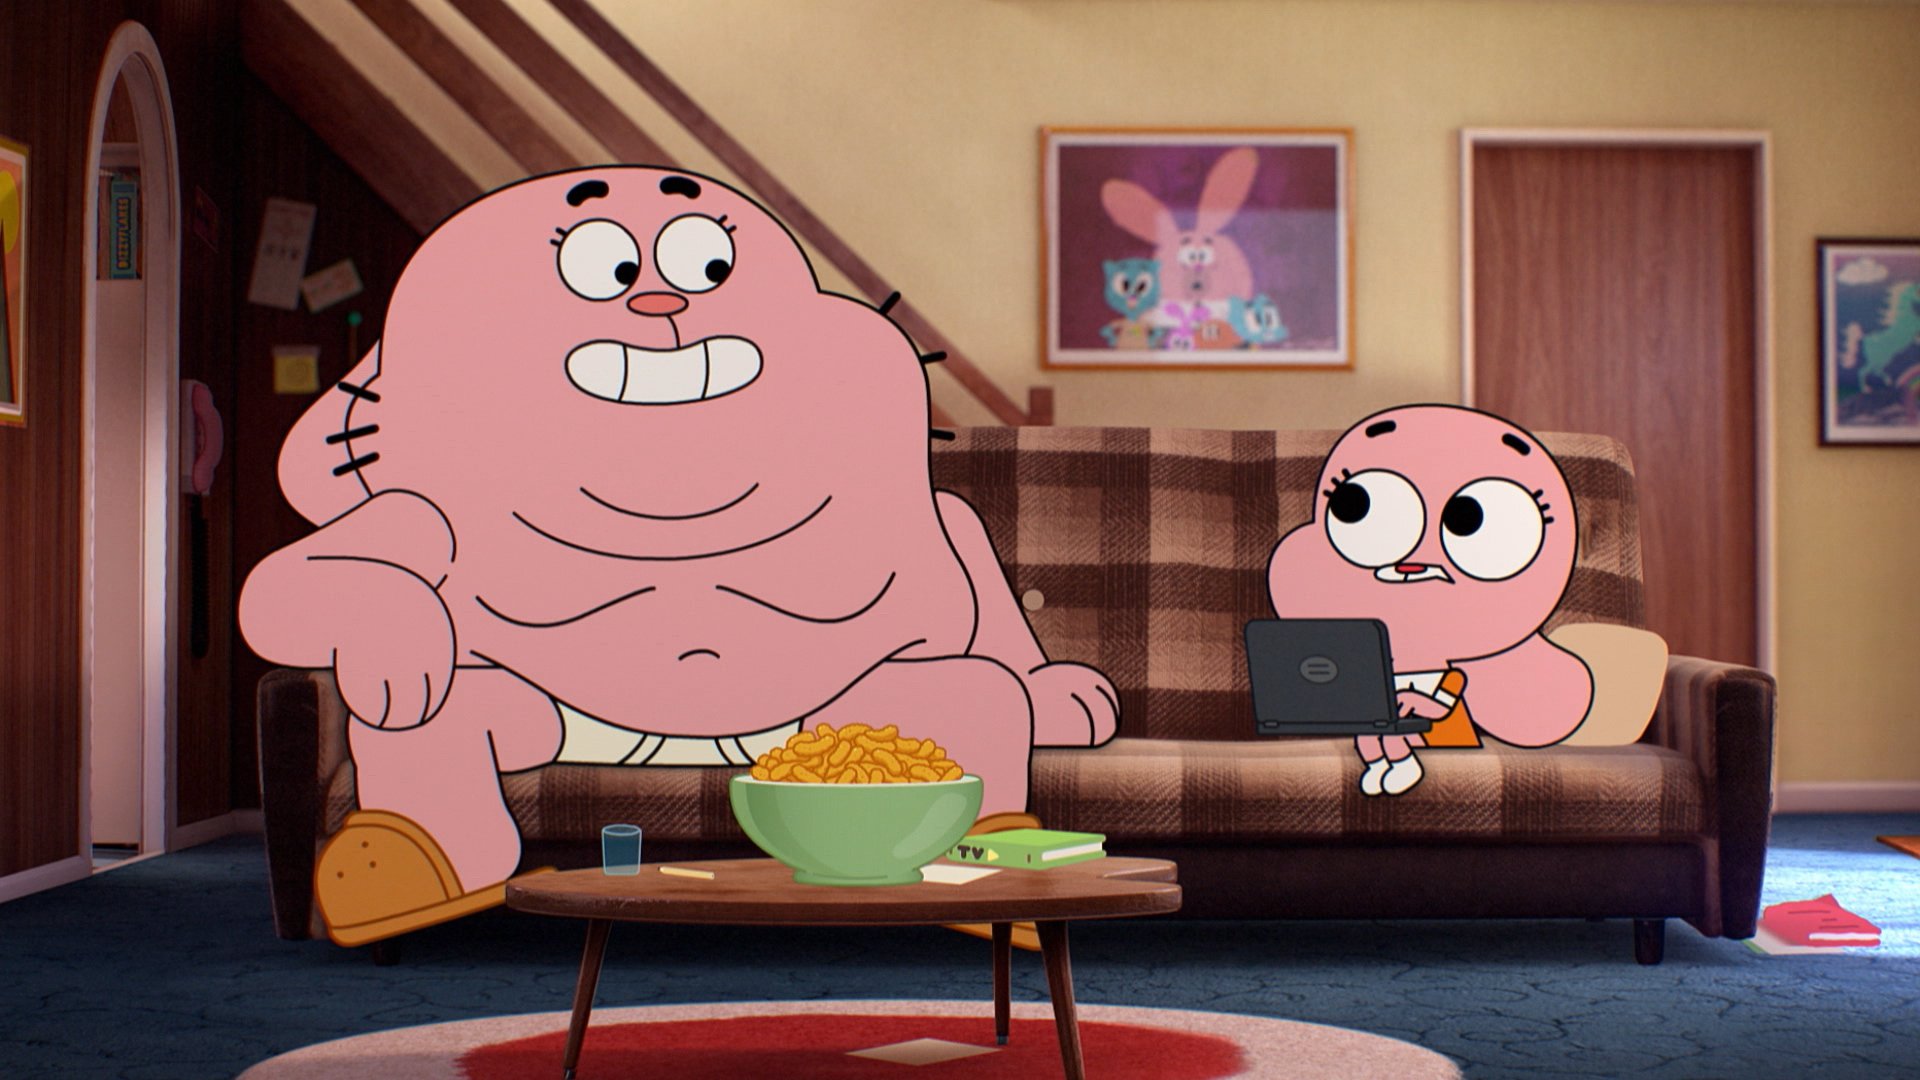 The Amazing World of Gumball Season 1 - episodes streaming online